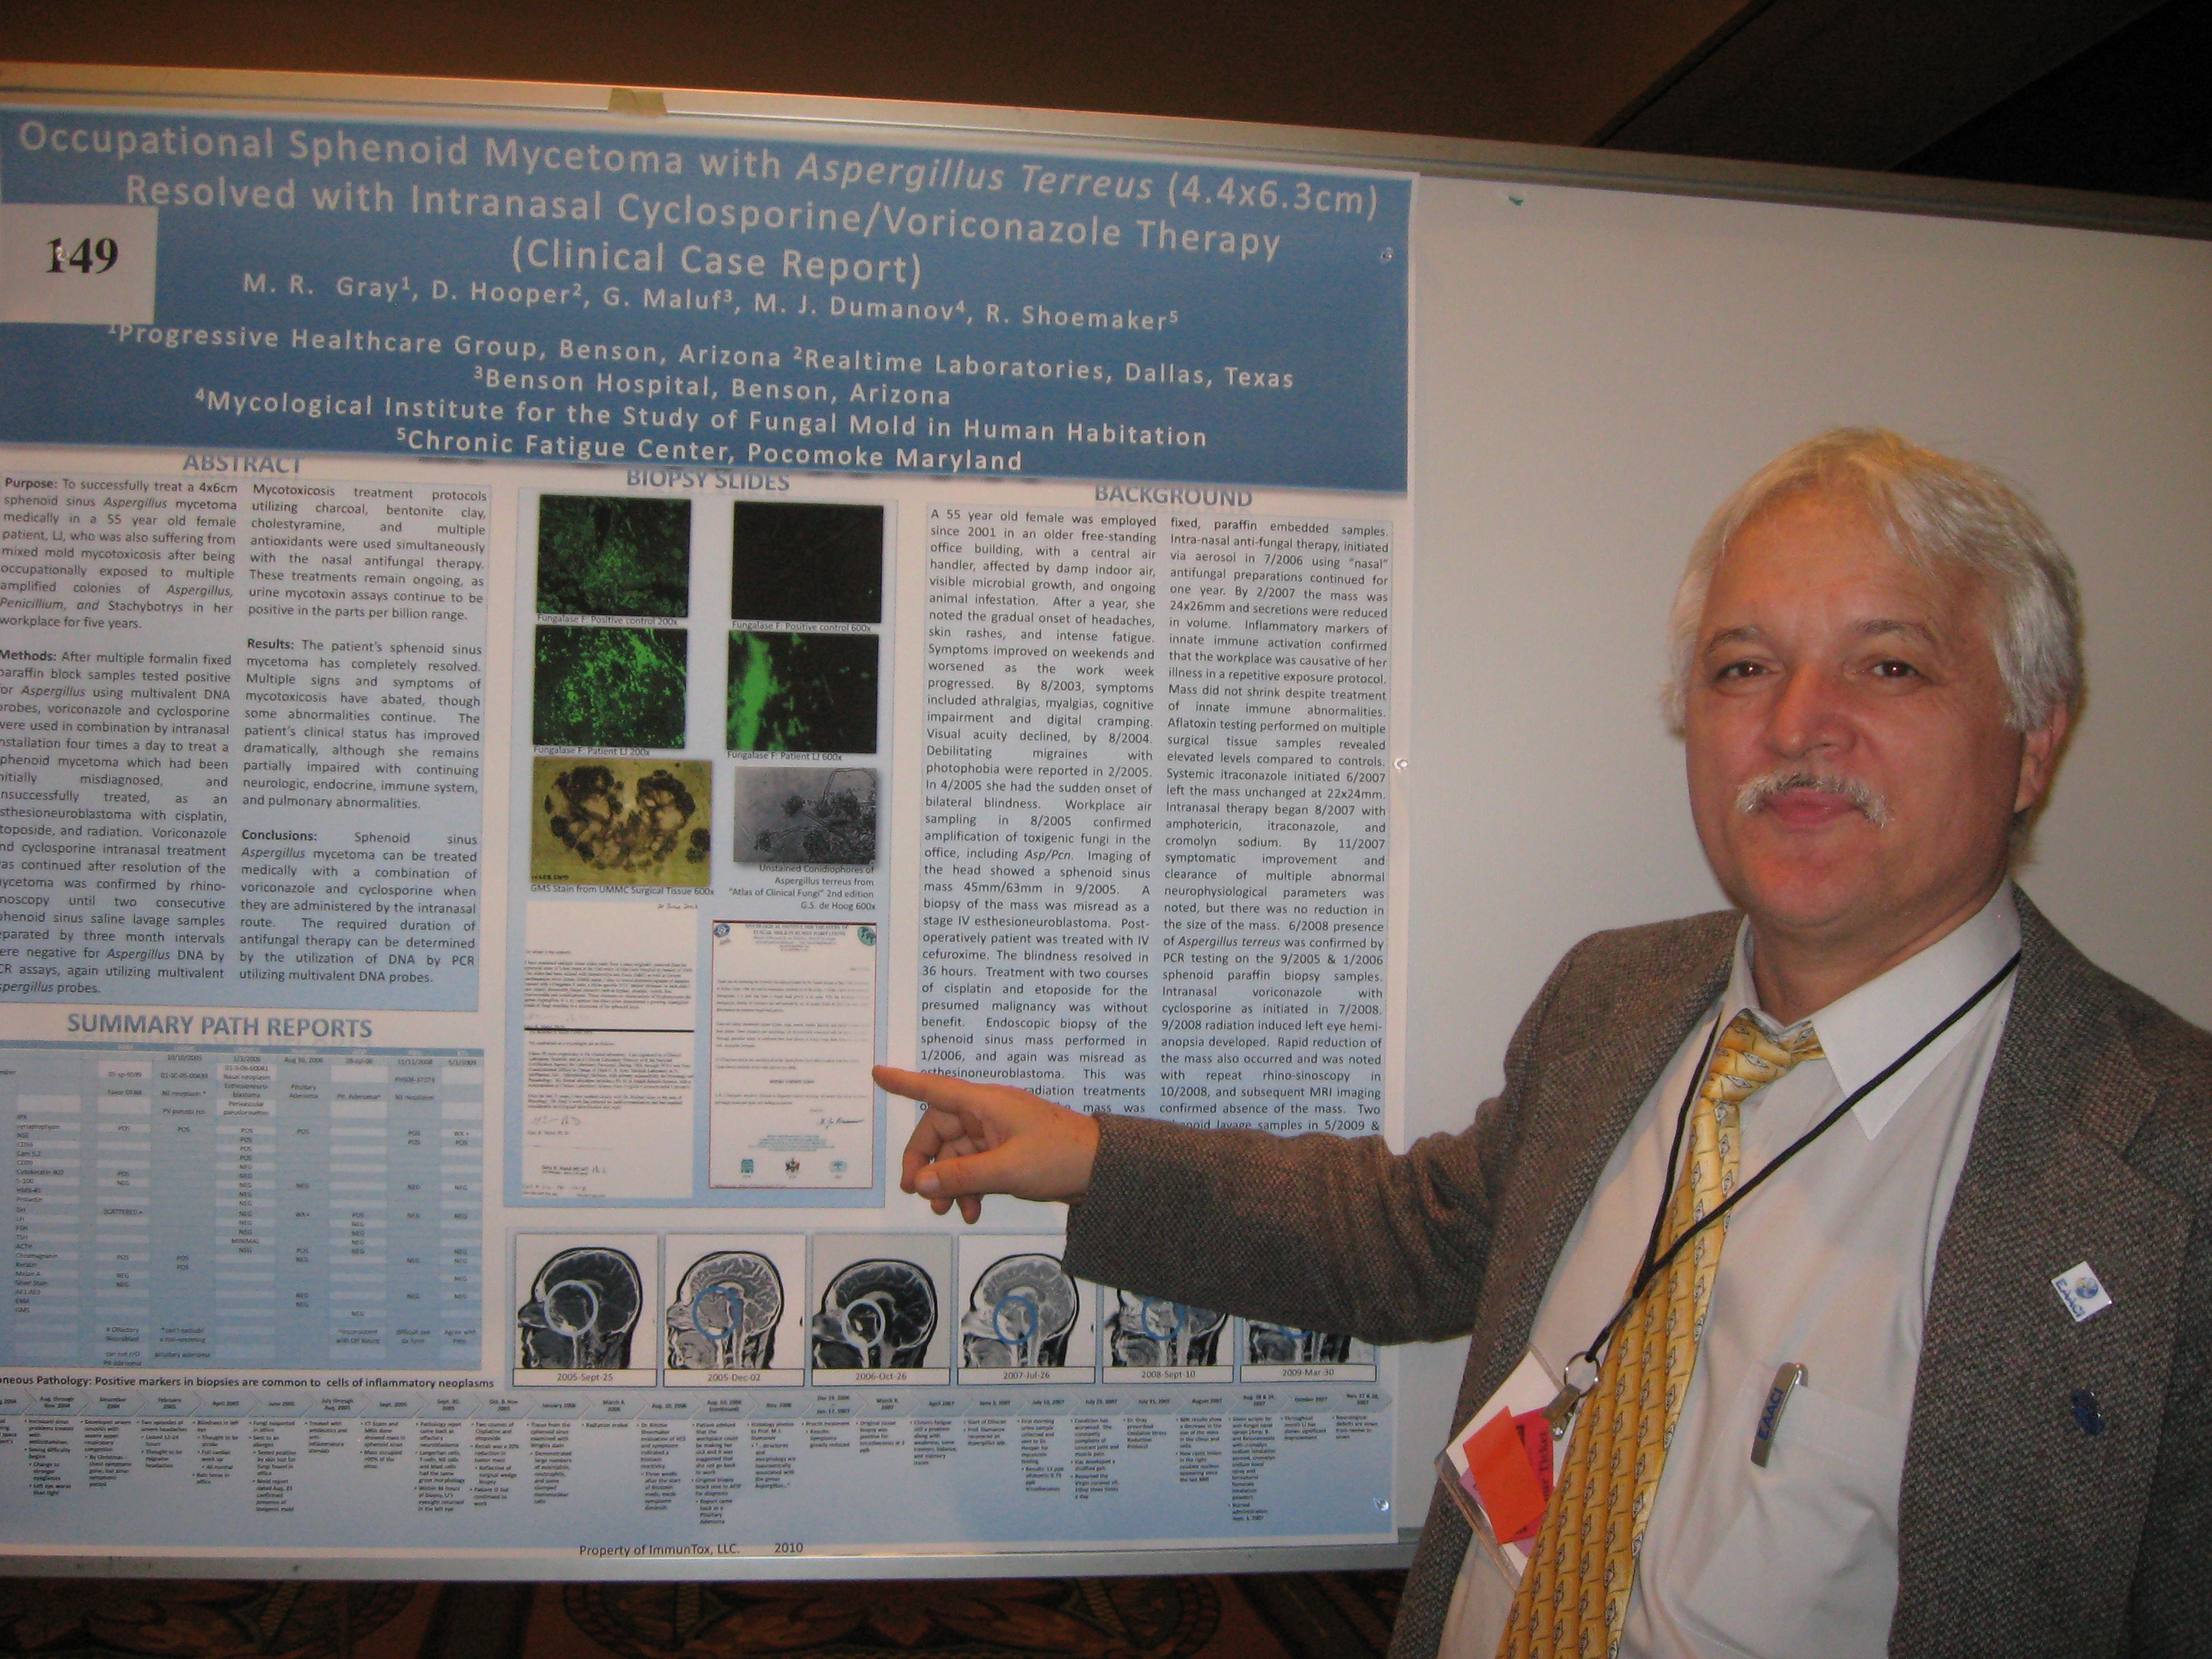 medical mycology and clinical reseach investigators michale gray, j dumanov, dennis hooper, ritchie shoemaker, g mauluf